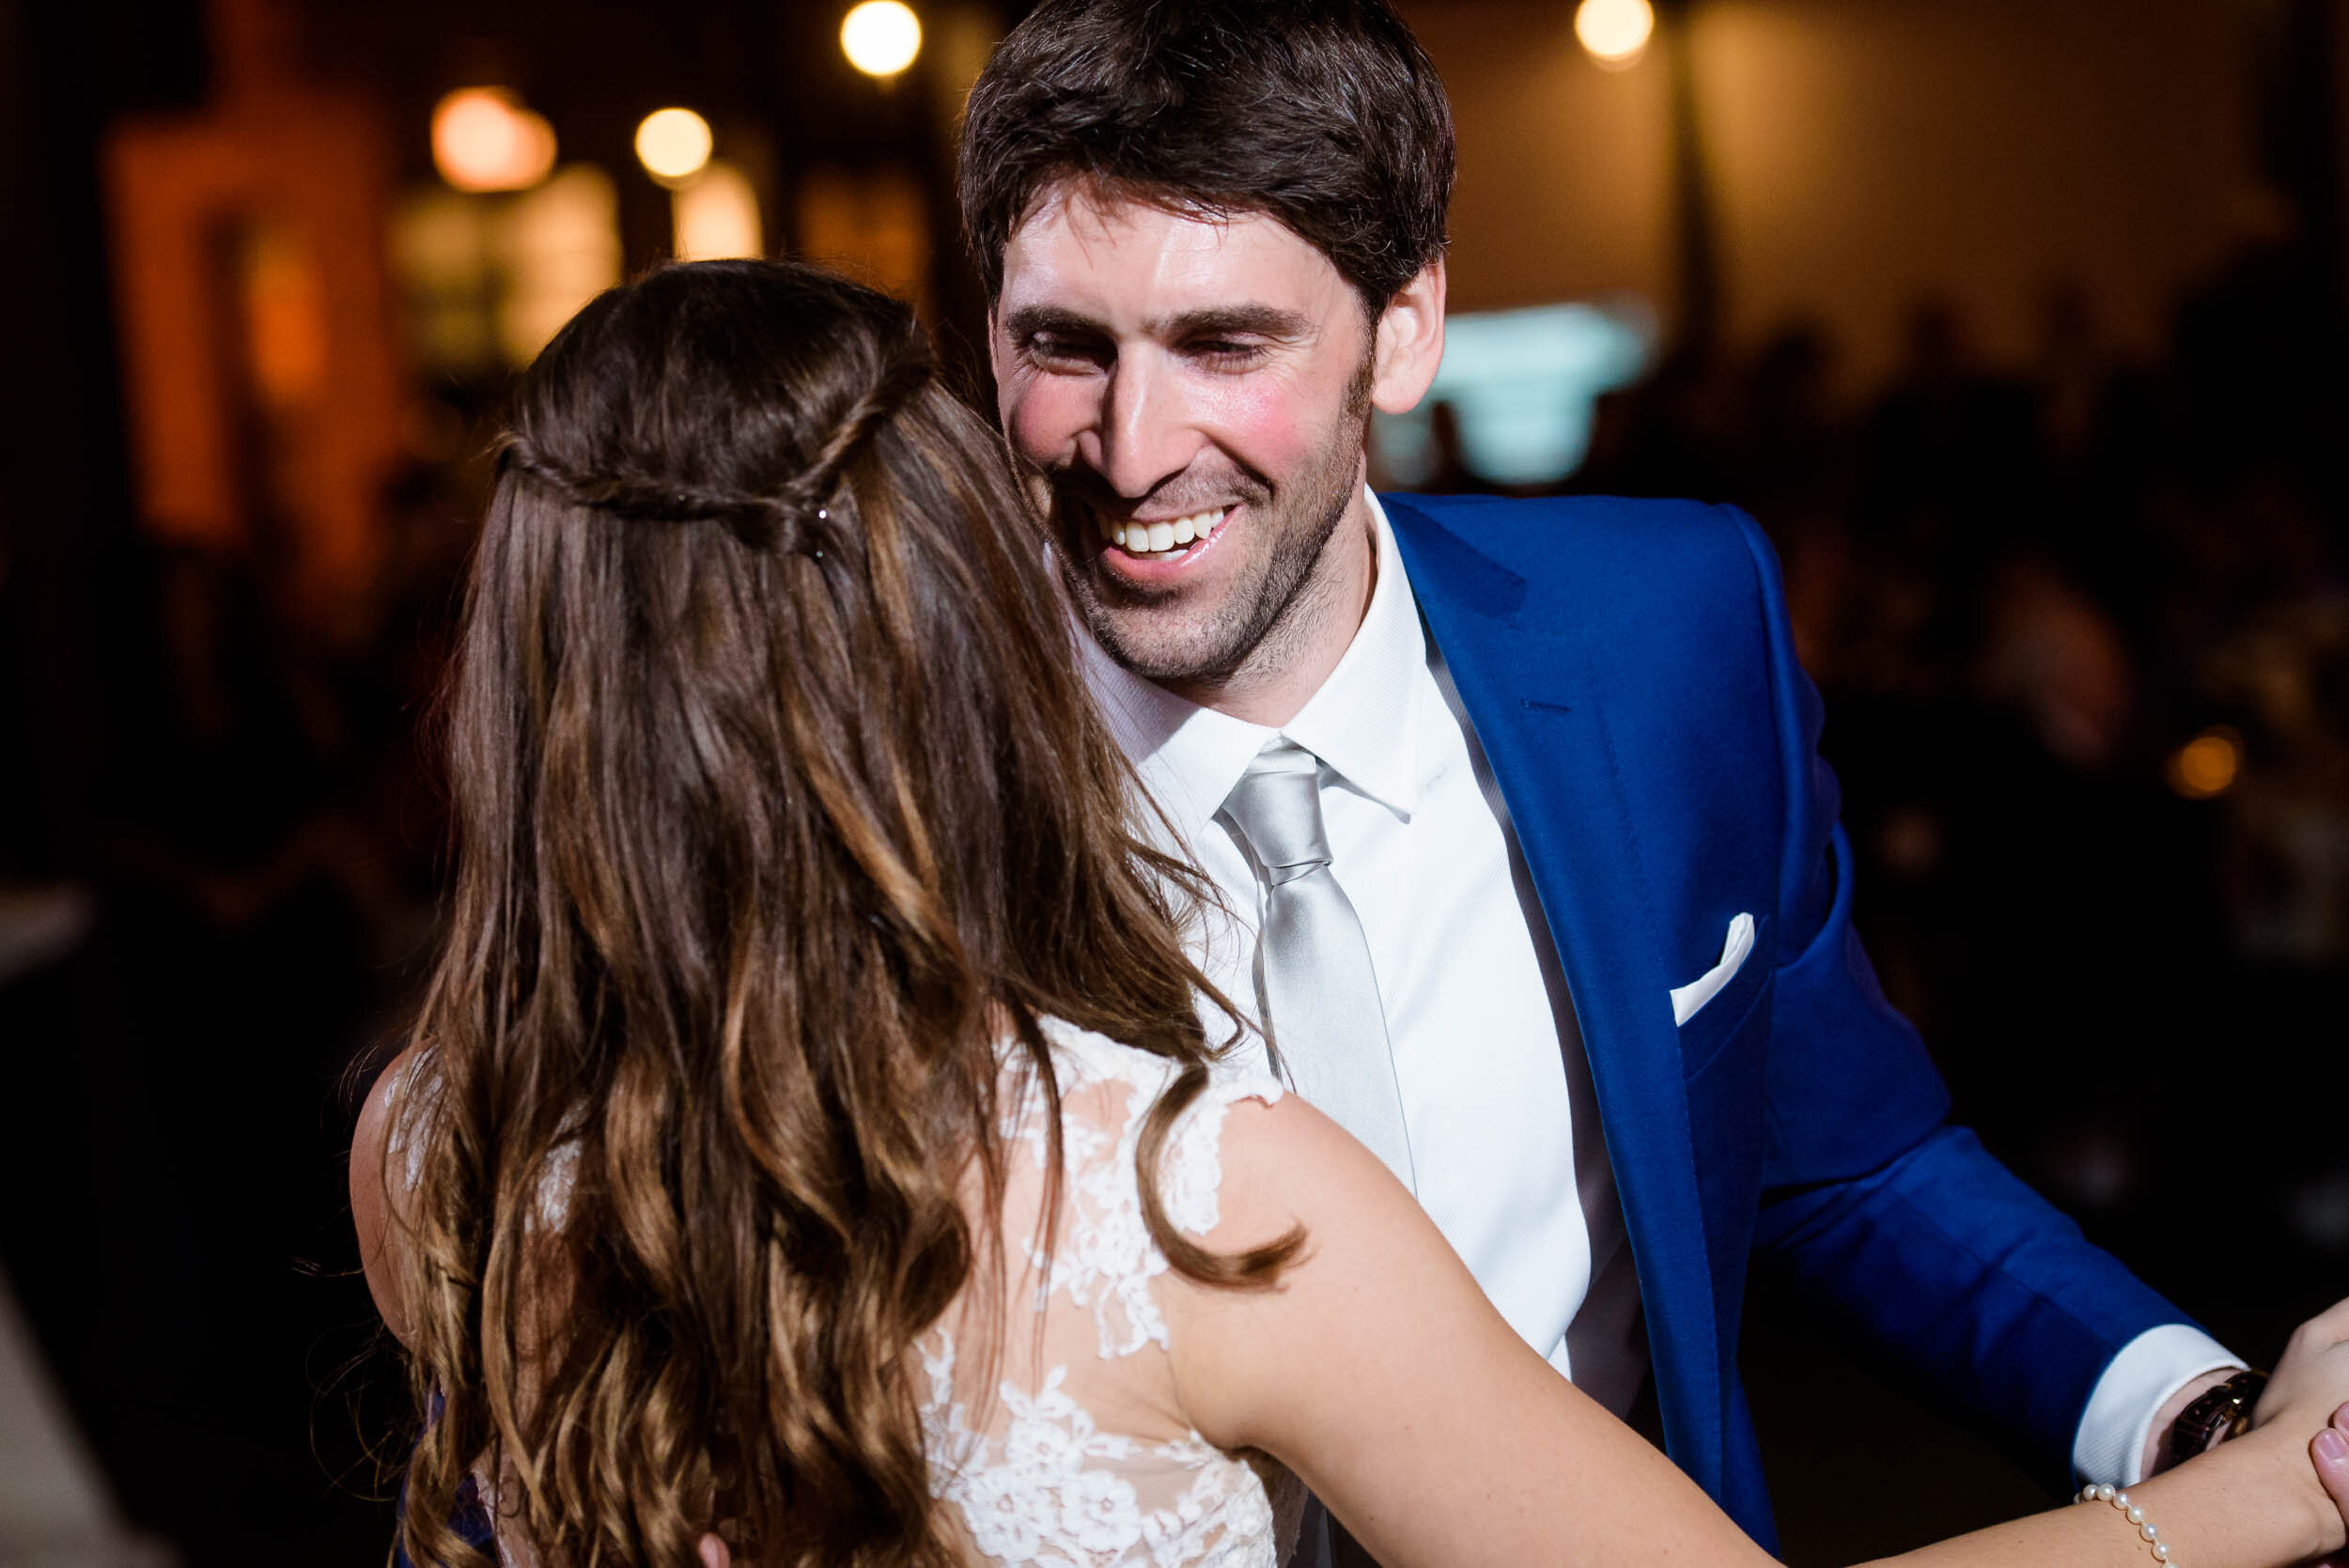 Groom smiles during the first dance: Ravenswood Event Center Chicago wedding captured by J. Brown Photography.  